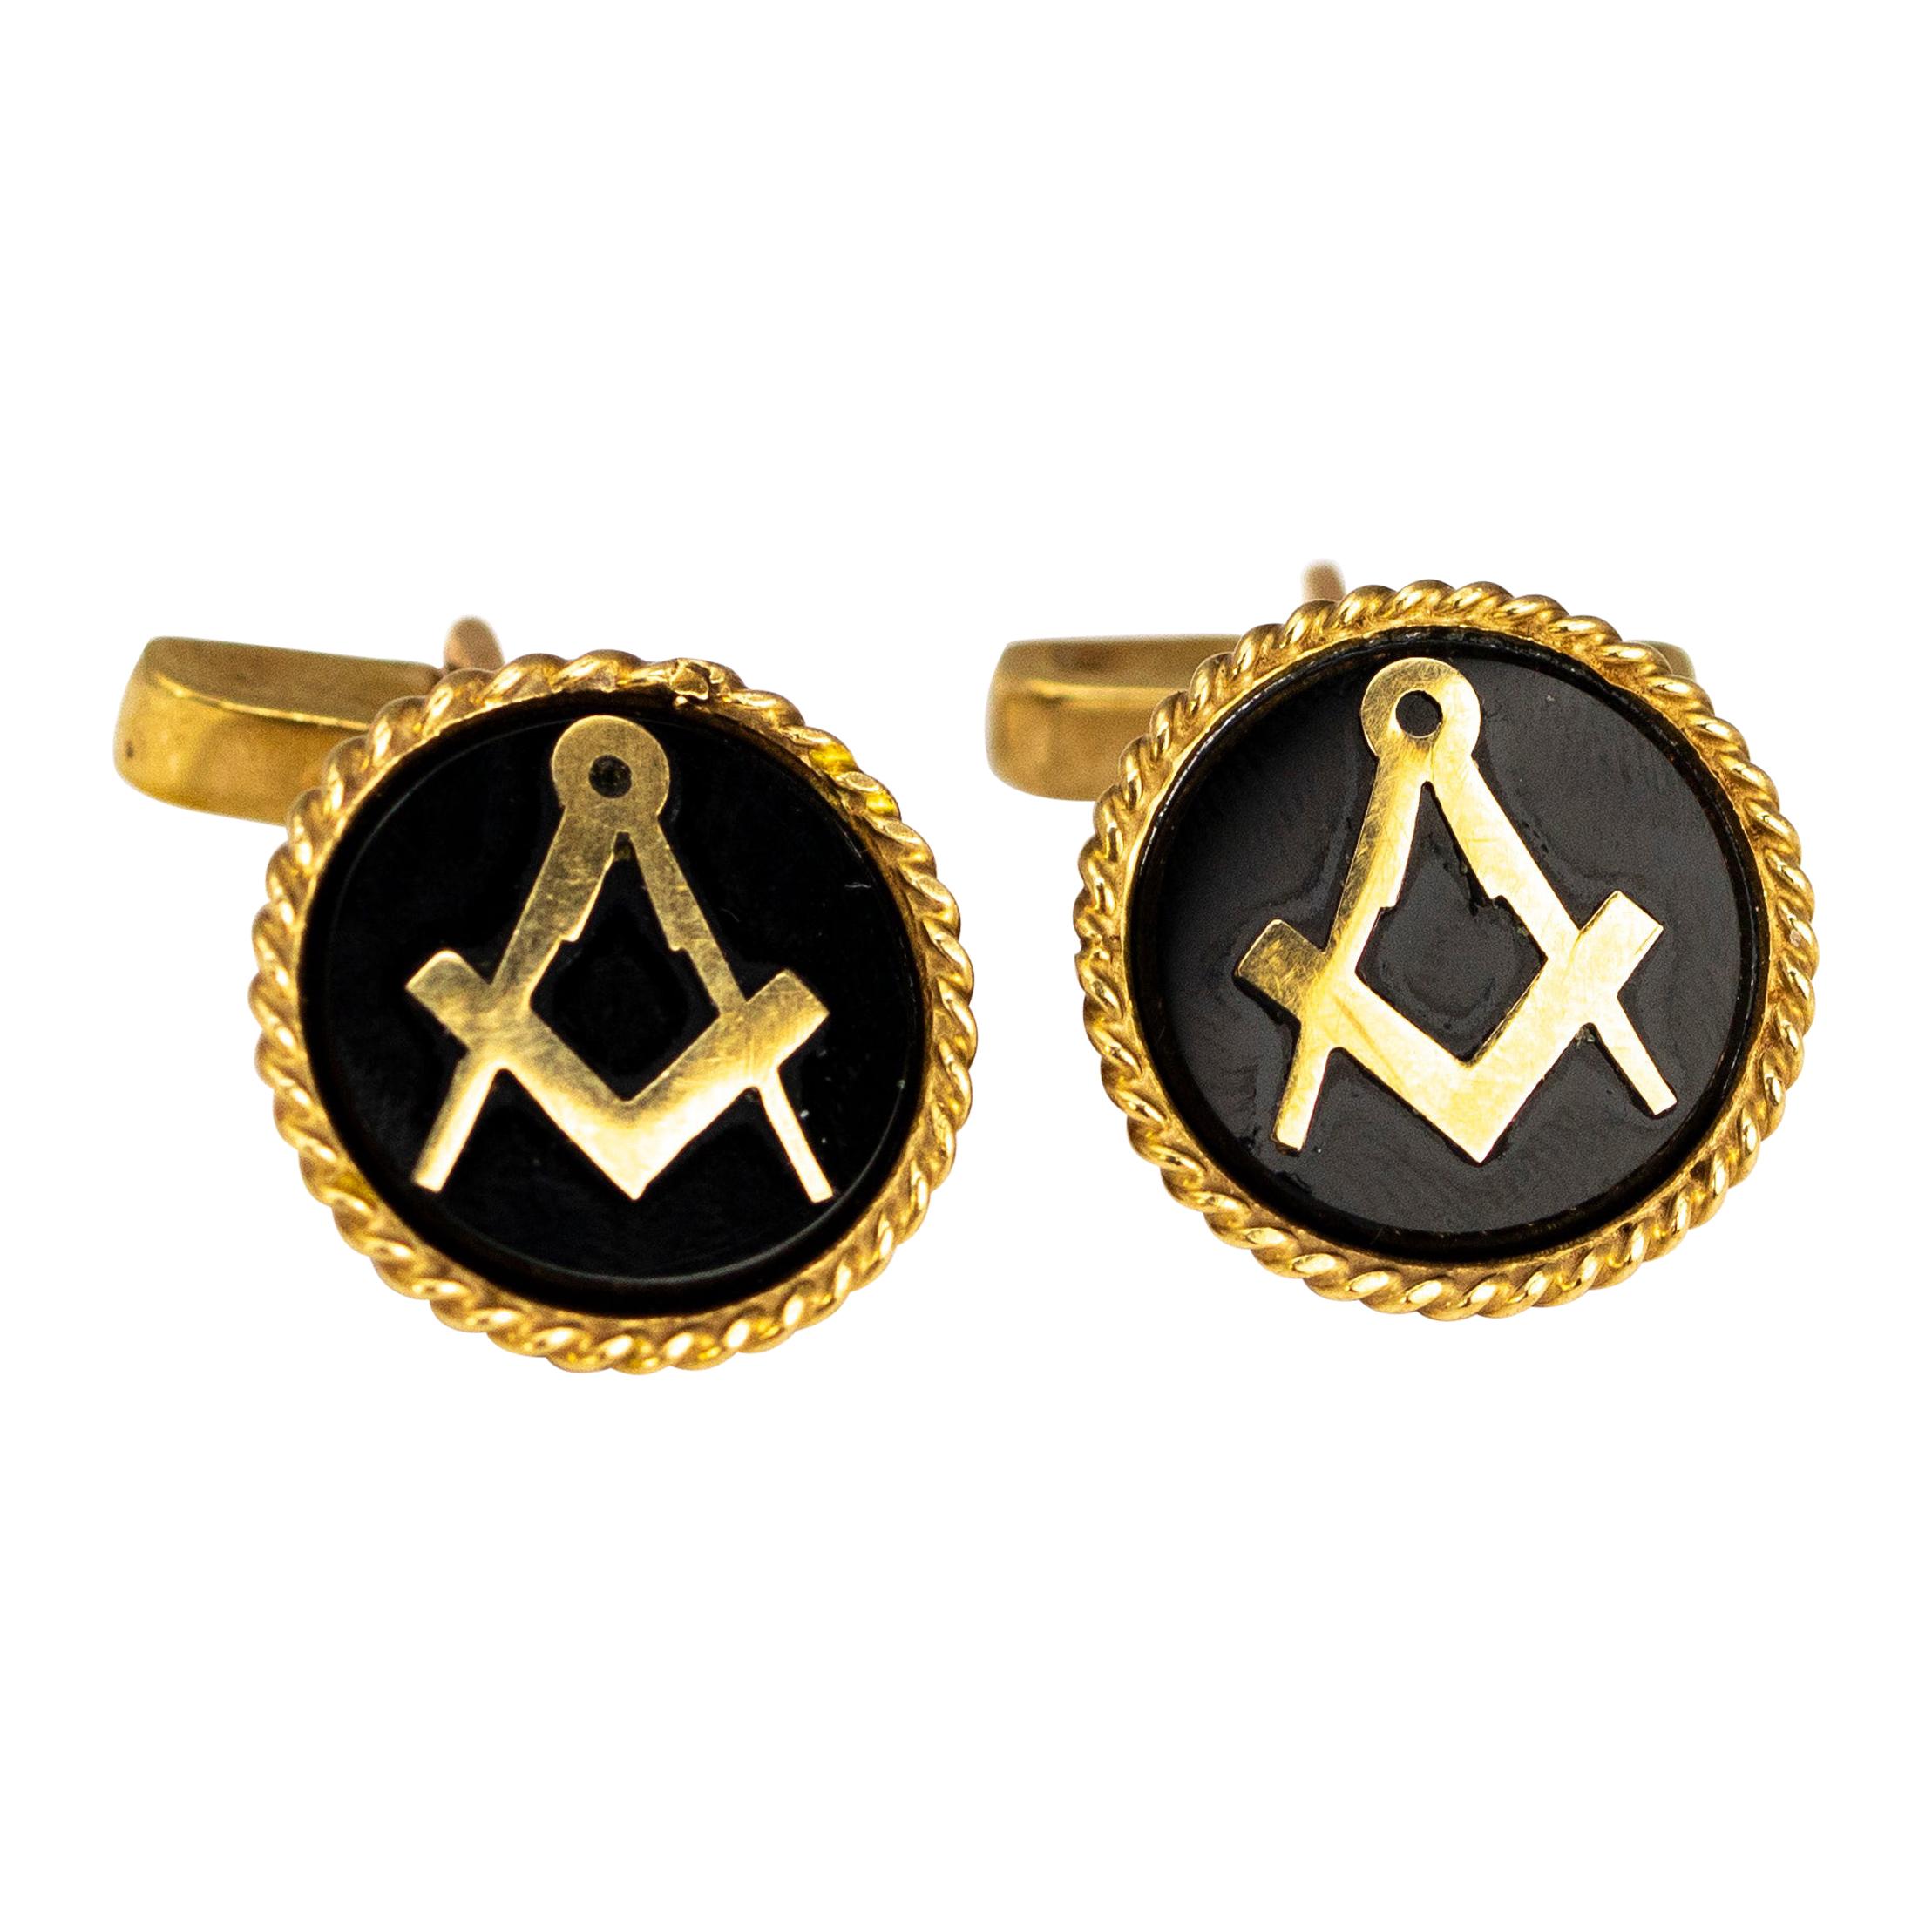 Vintage Onyx and 9 Carat Gold Cuff Links